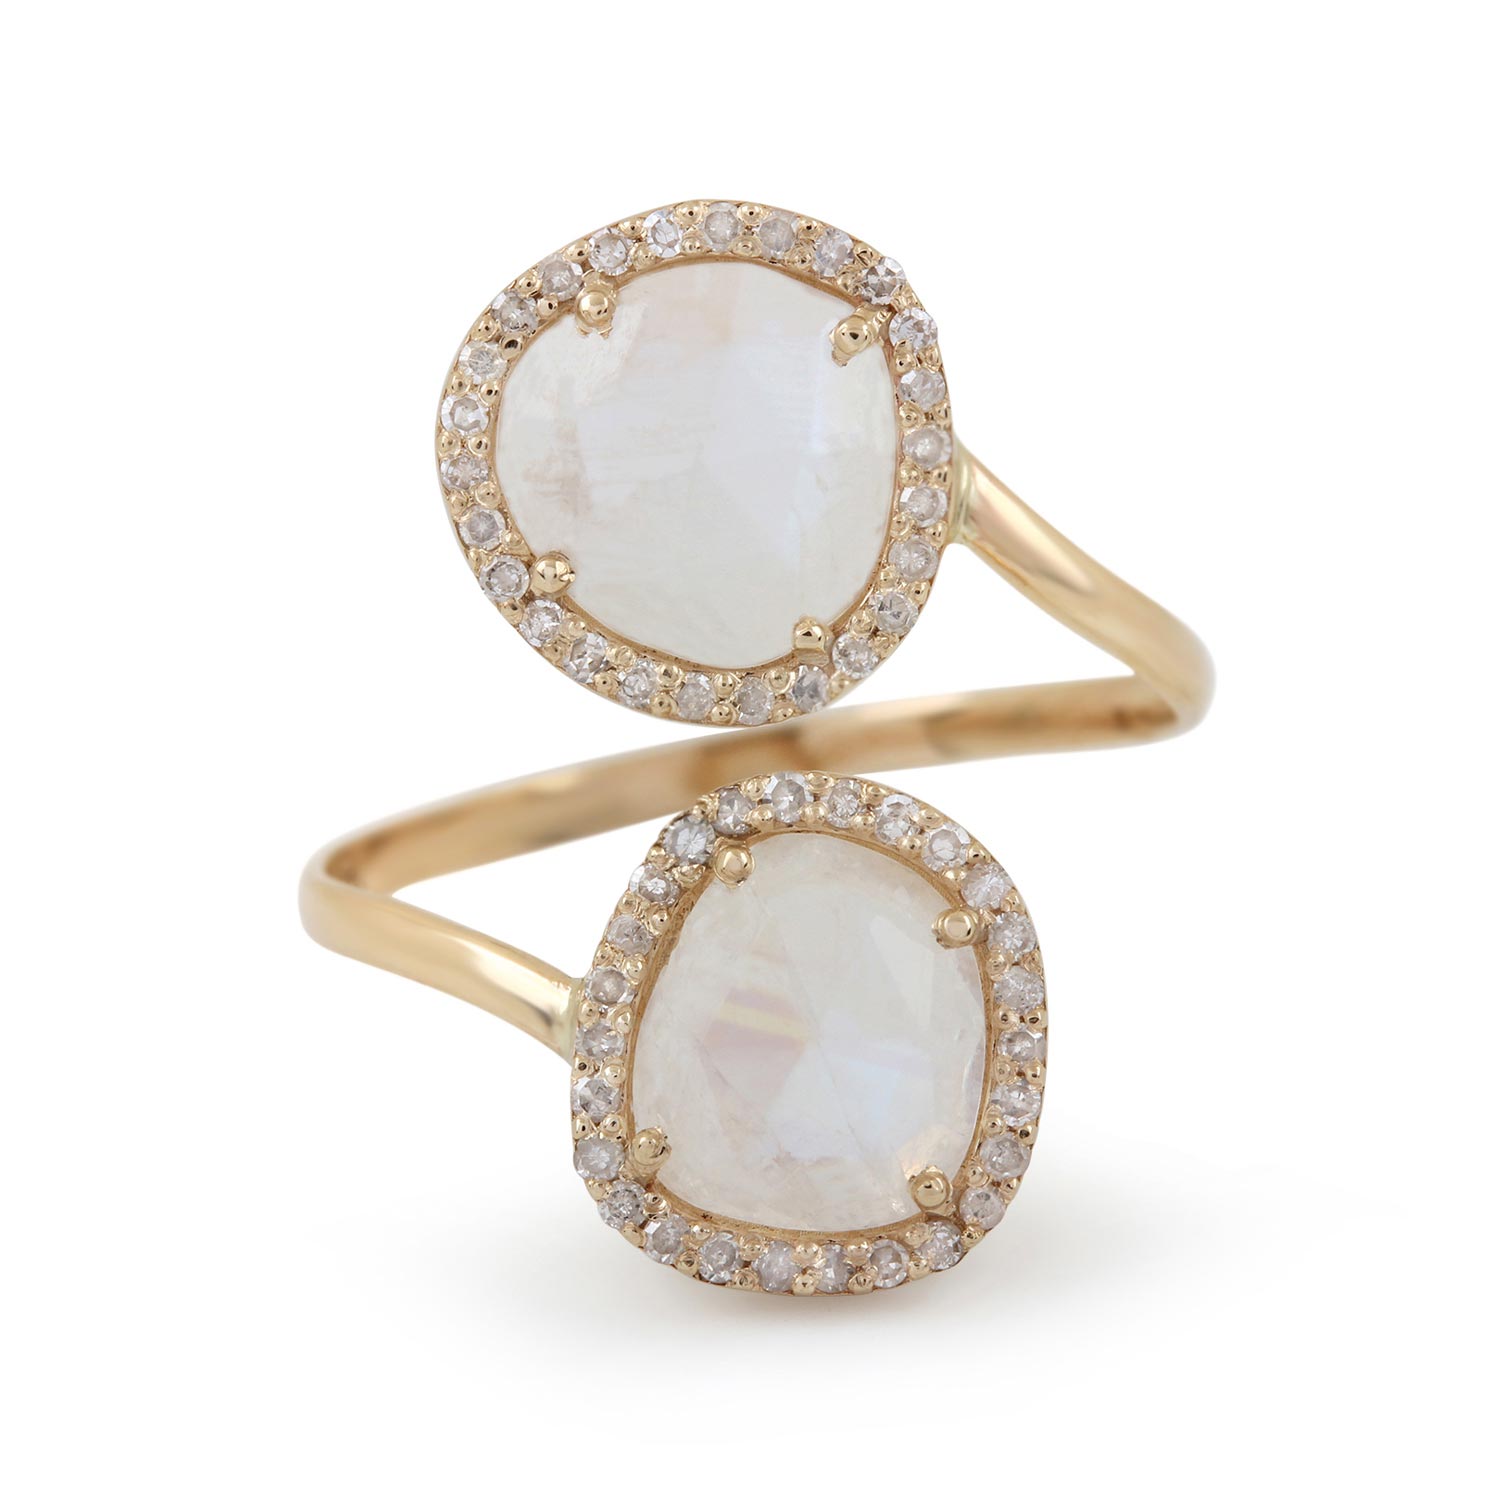 Moonstone 14K Solid Gold Ring Pave Diamond Jewelry